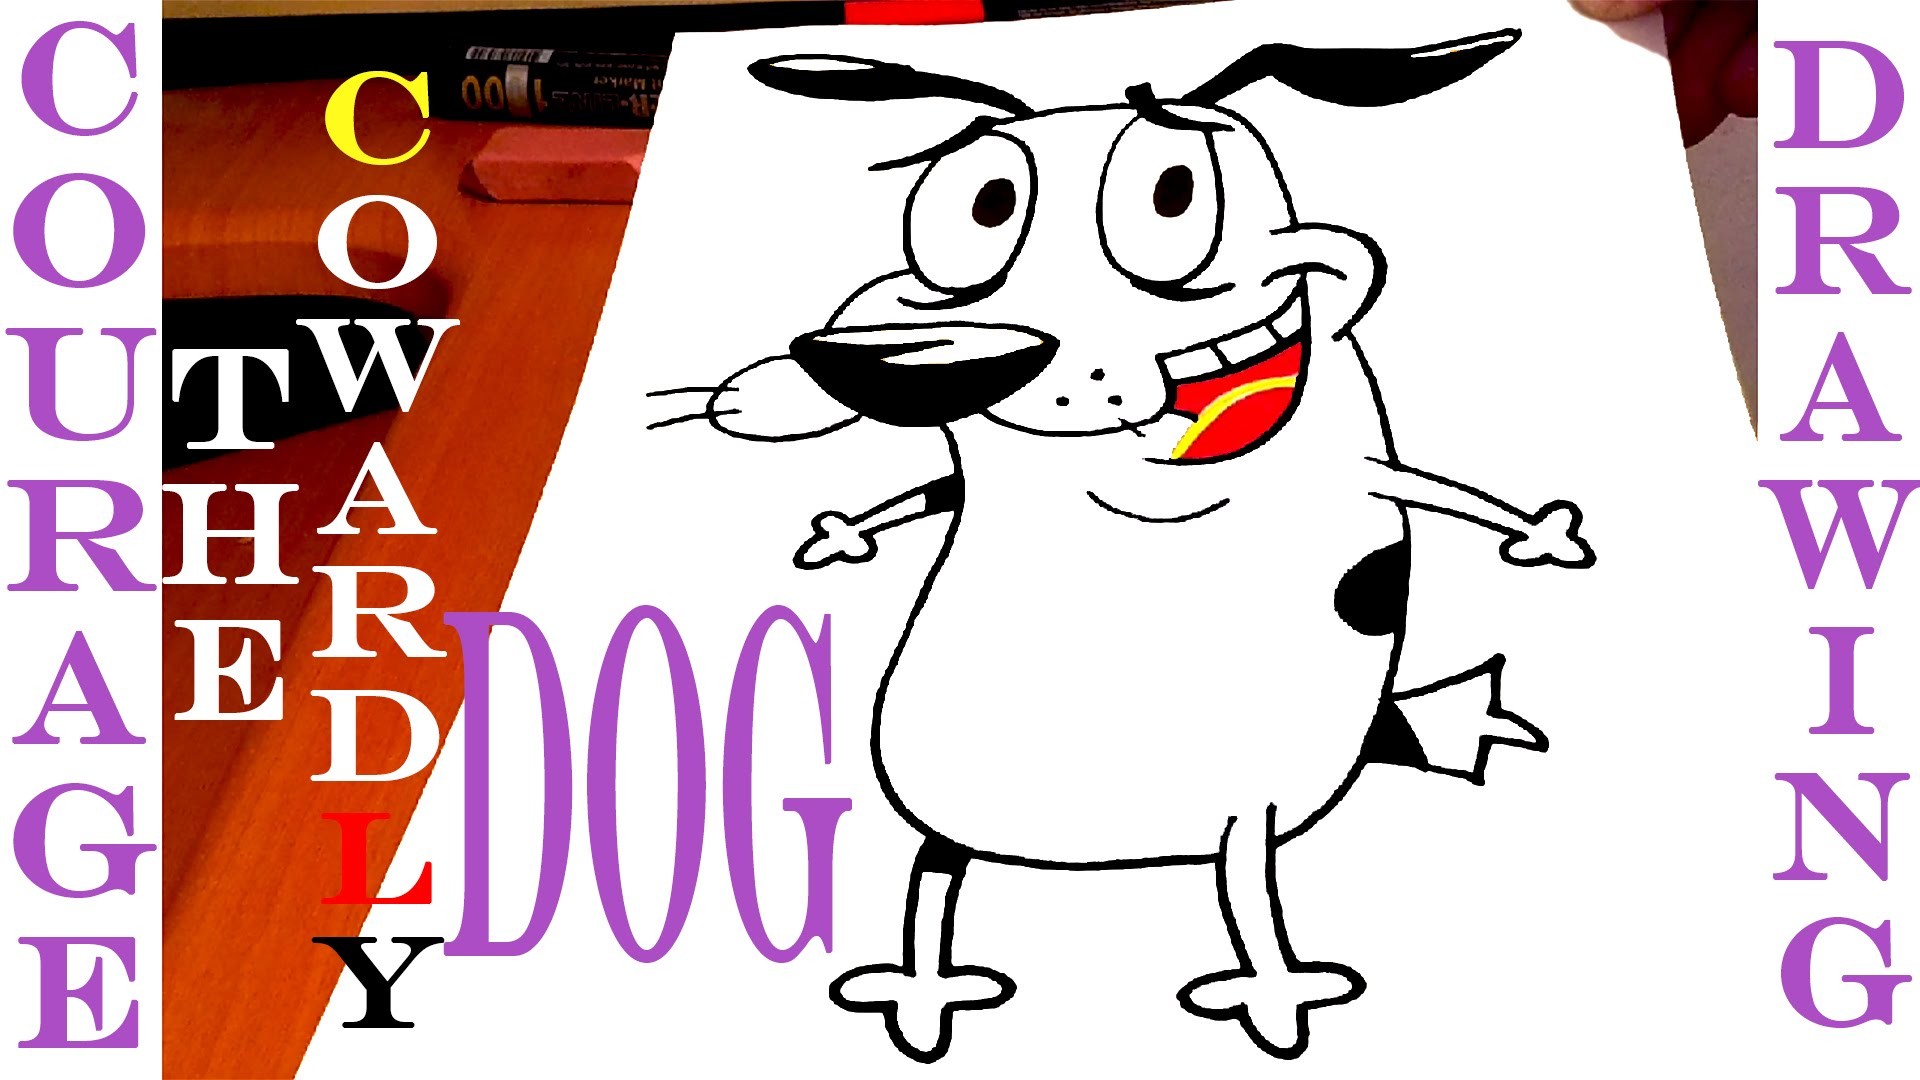 How to draw COURAGE The Cowardly Dog EASY, Pencil, draw easy stuff but